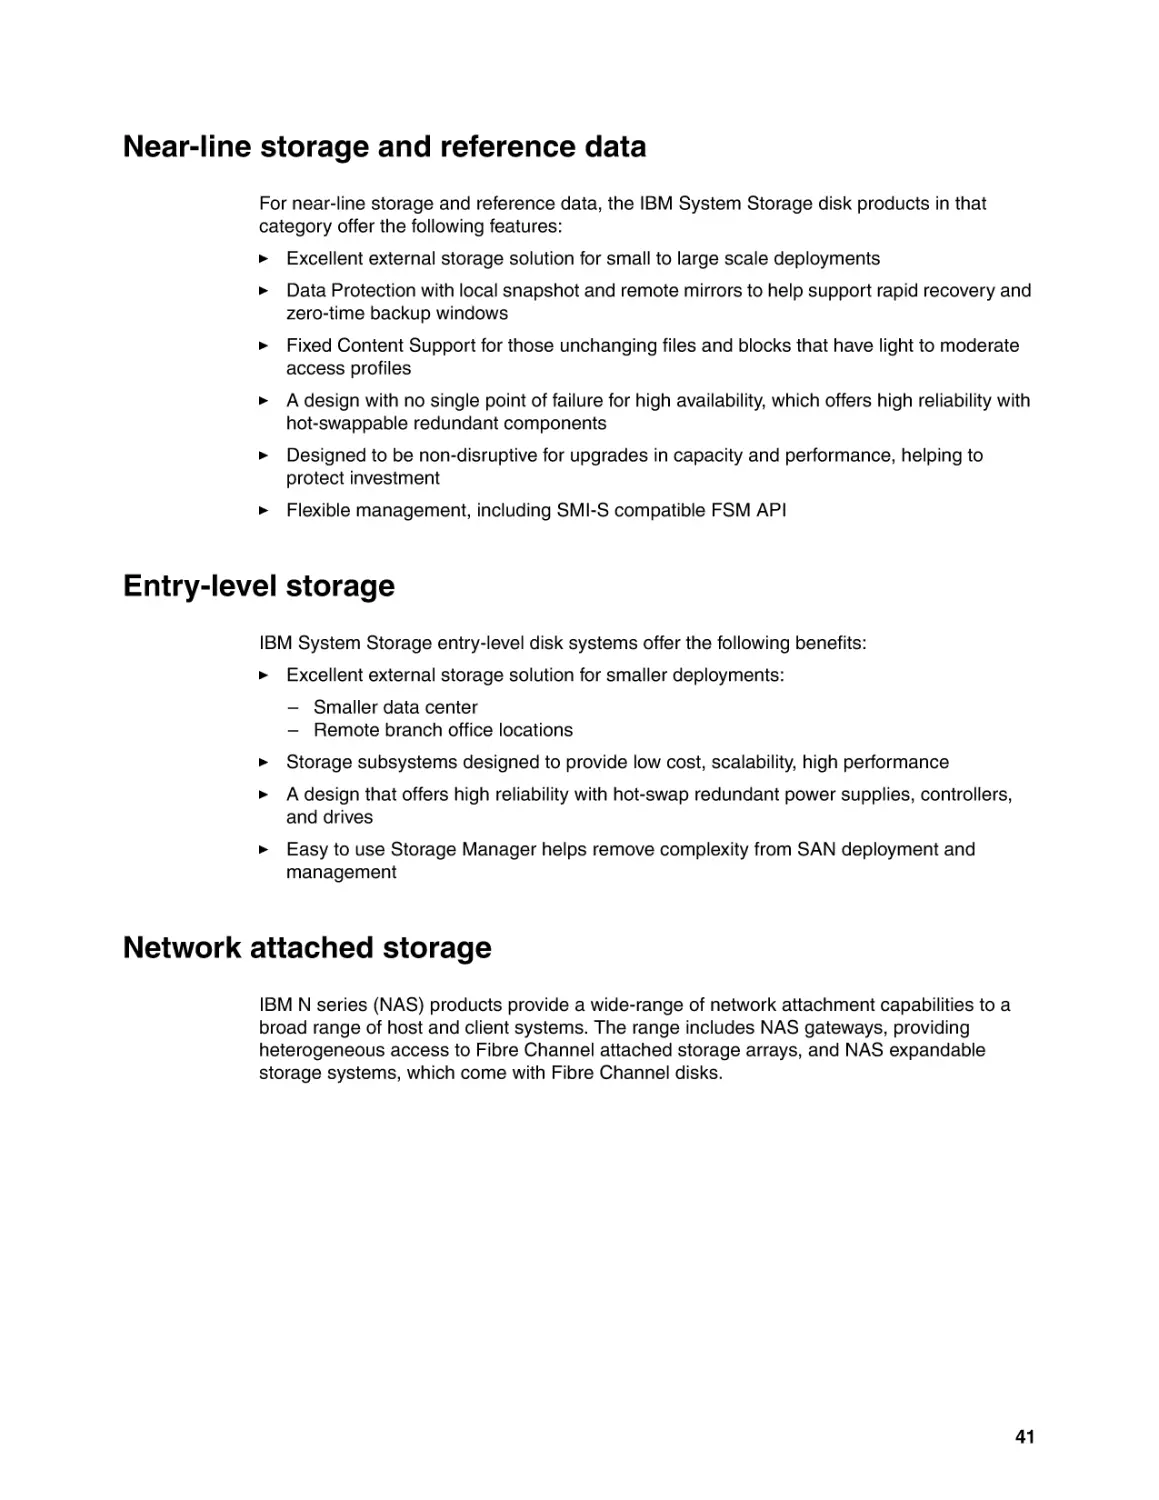 Near-line storage and reference data
Entry-level storage
Network attached storage